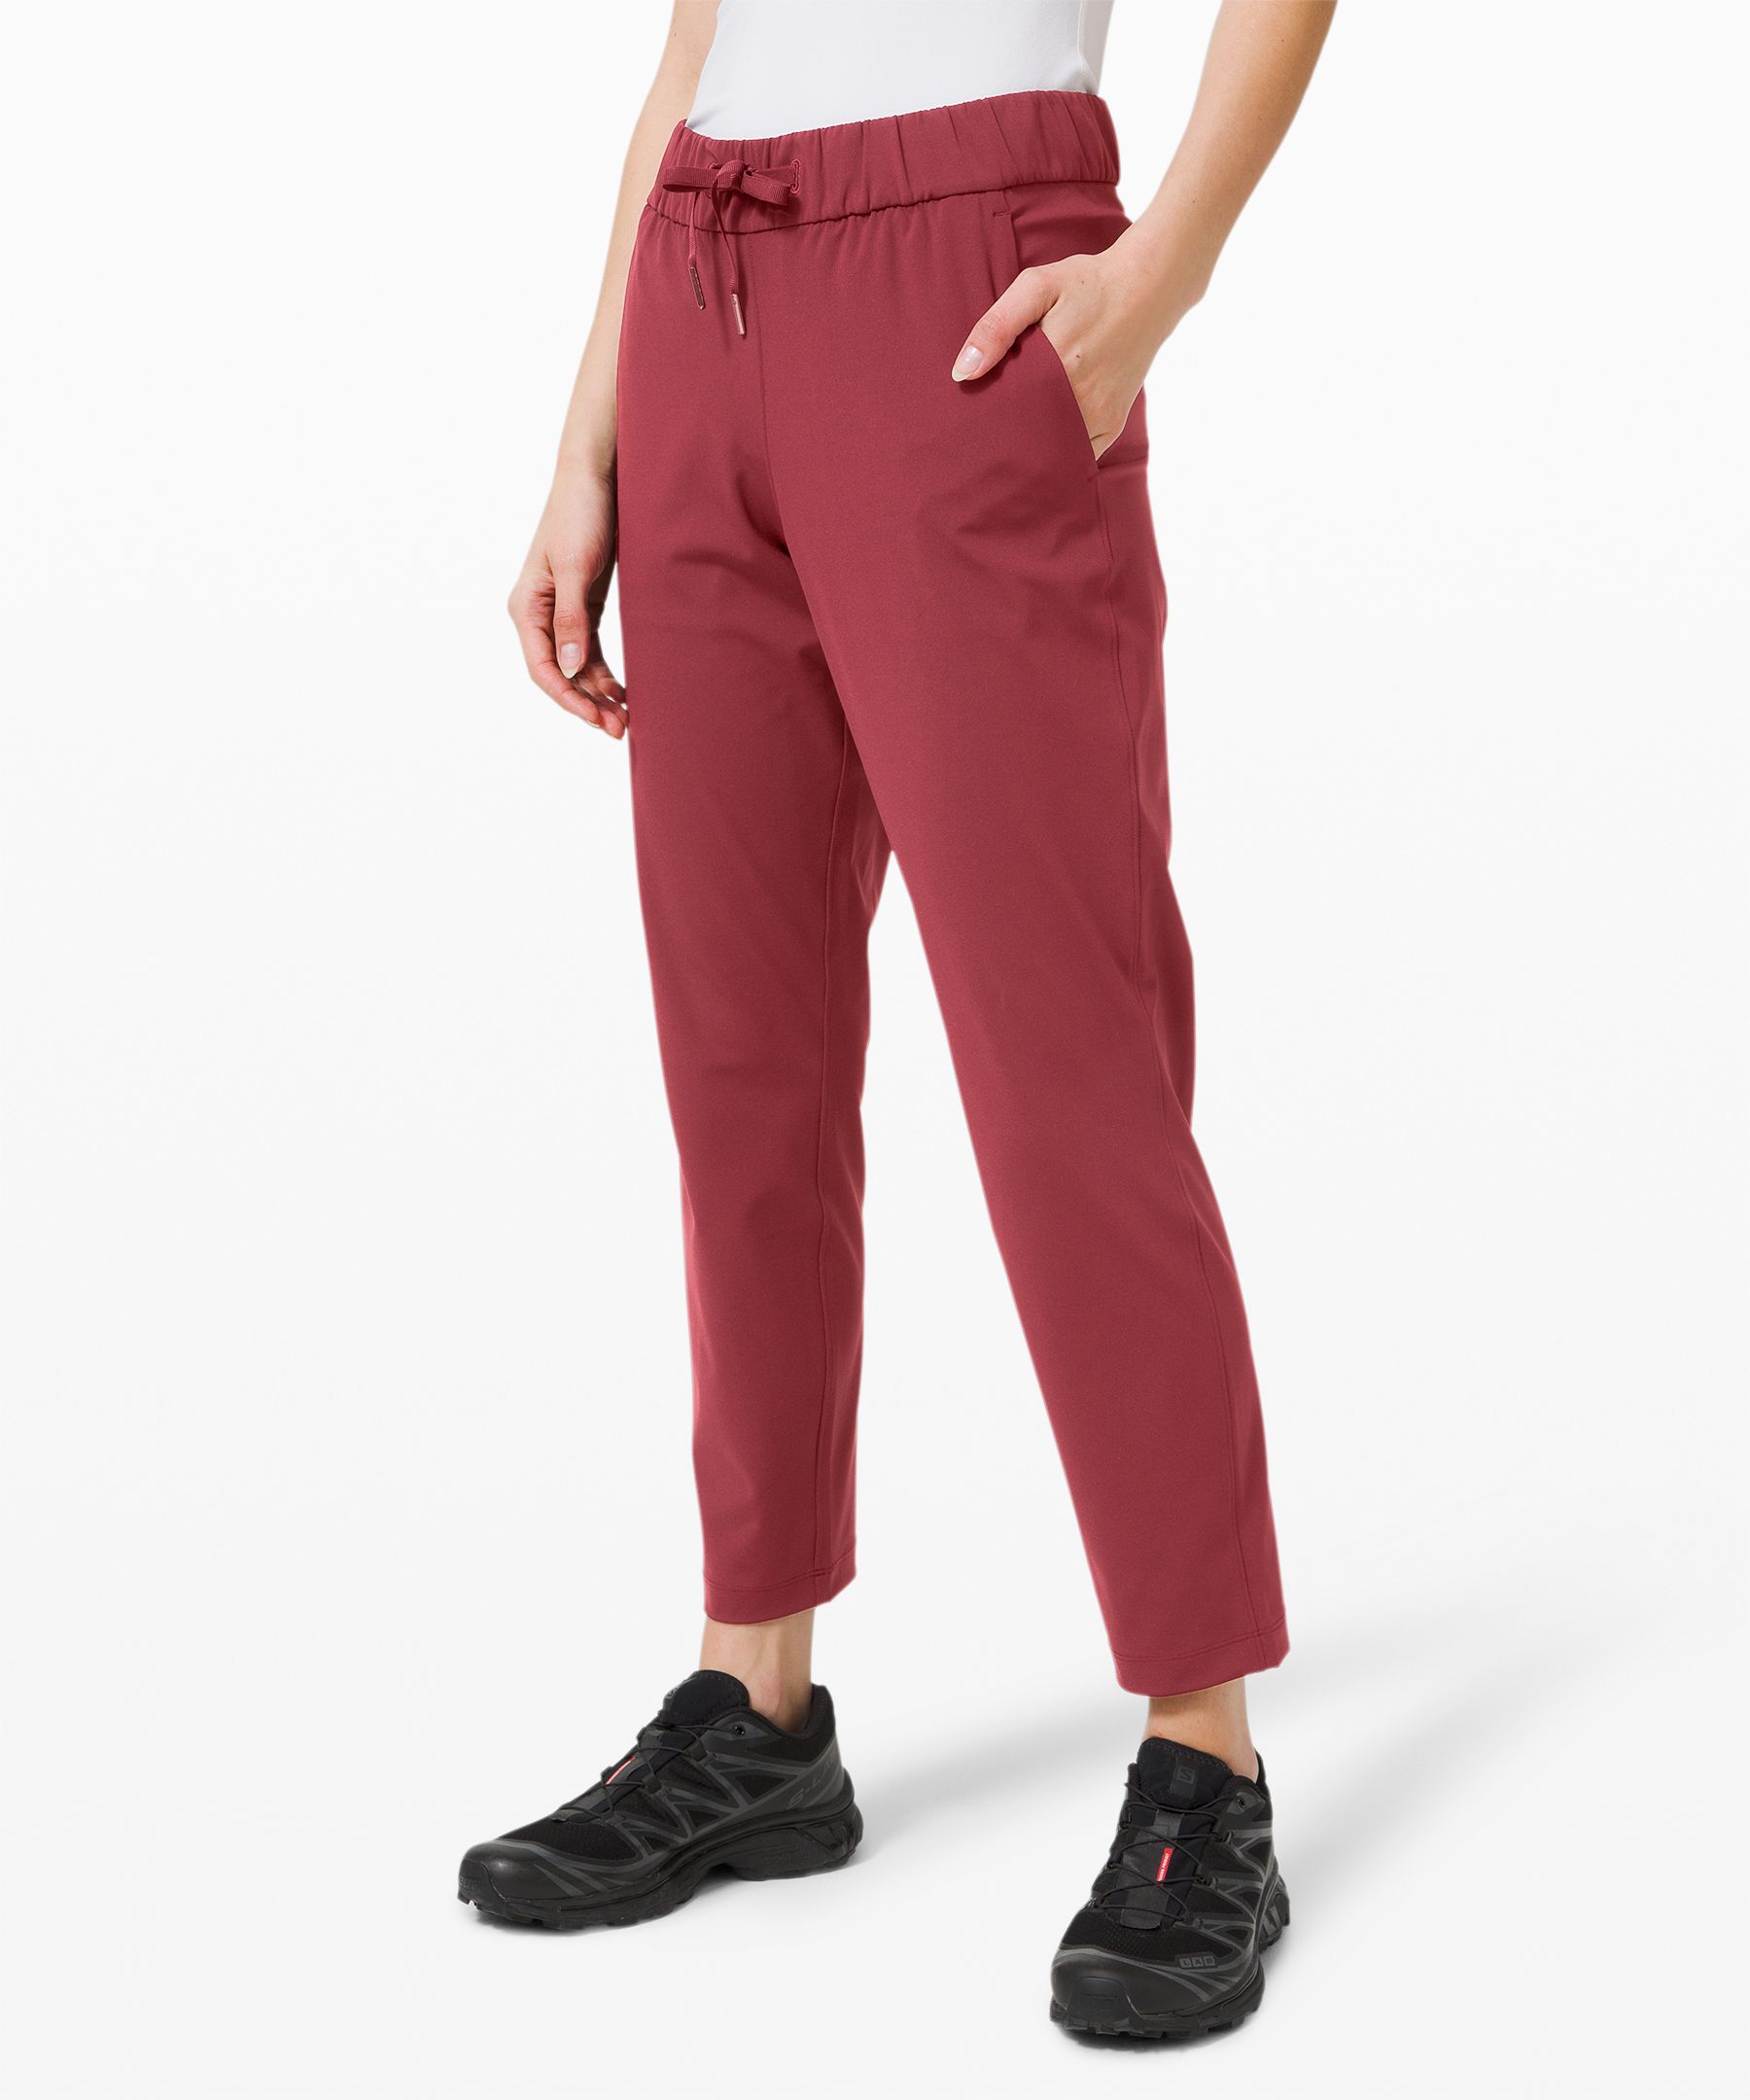 Lululemon On The Fly 7/8 Pant 27" In Red